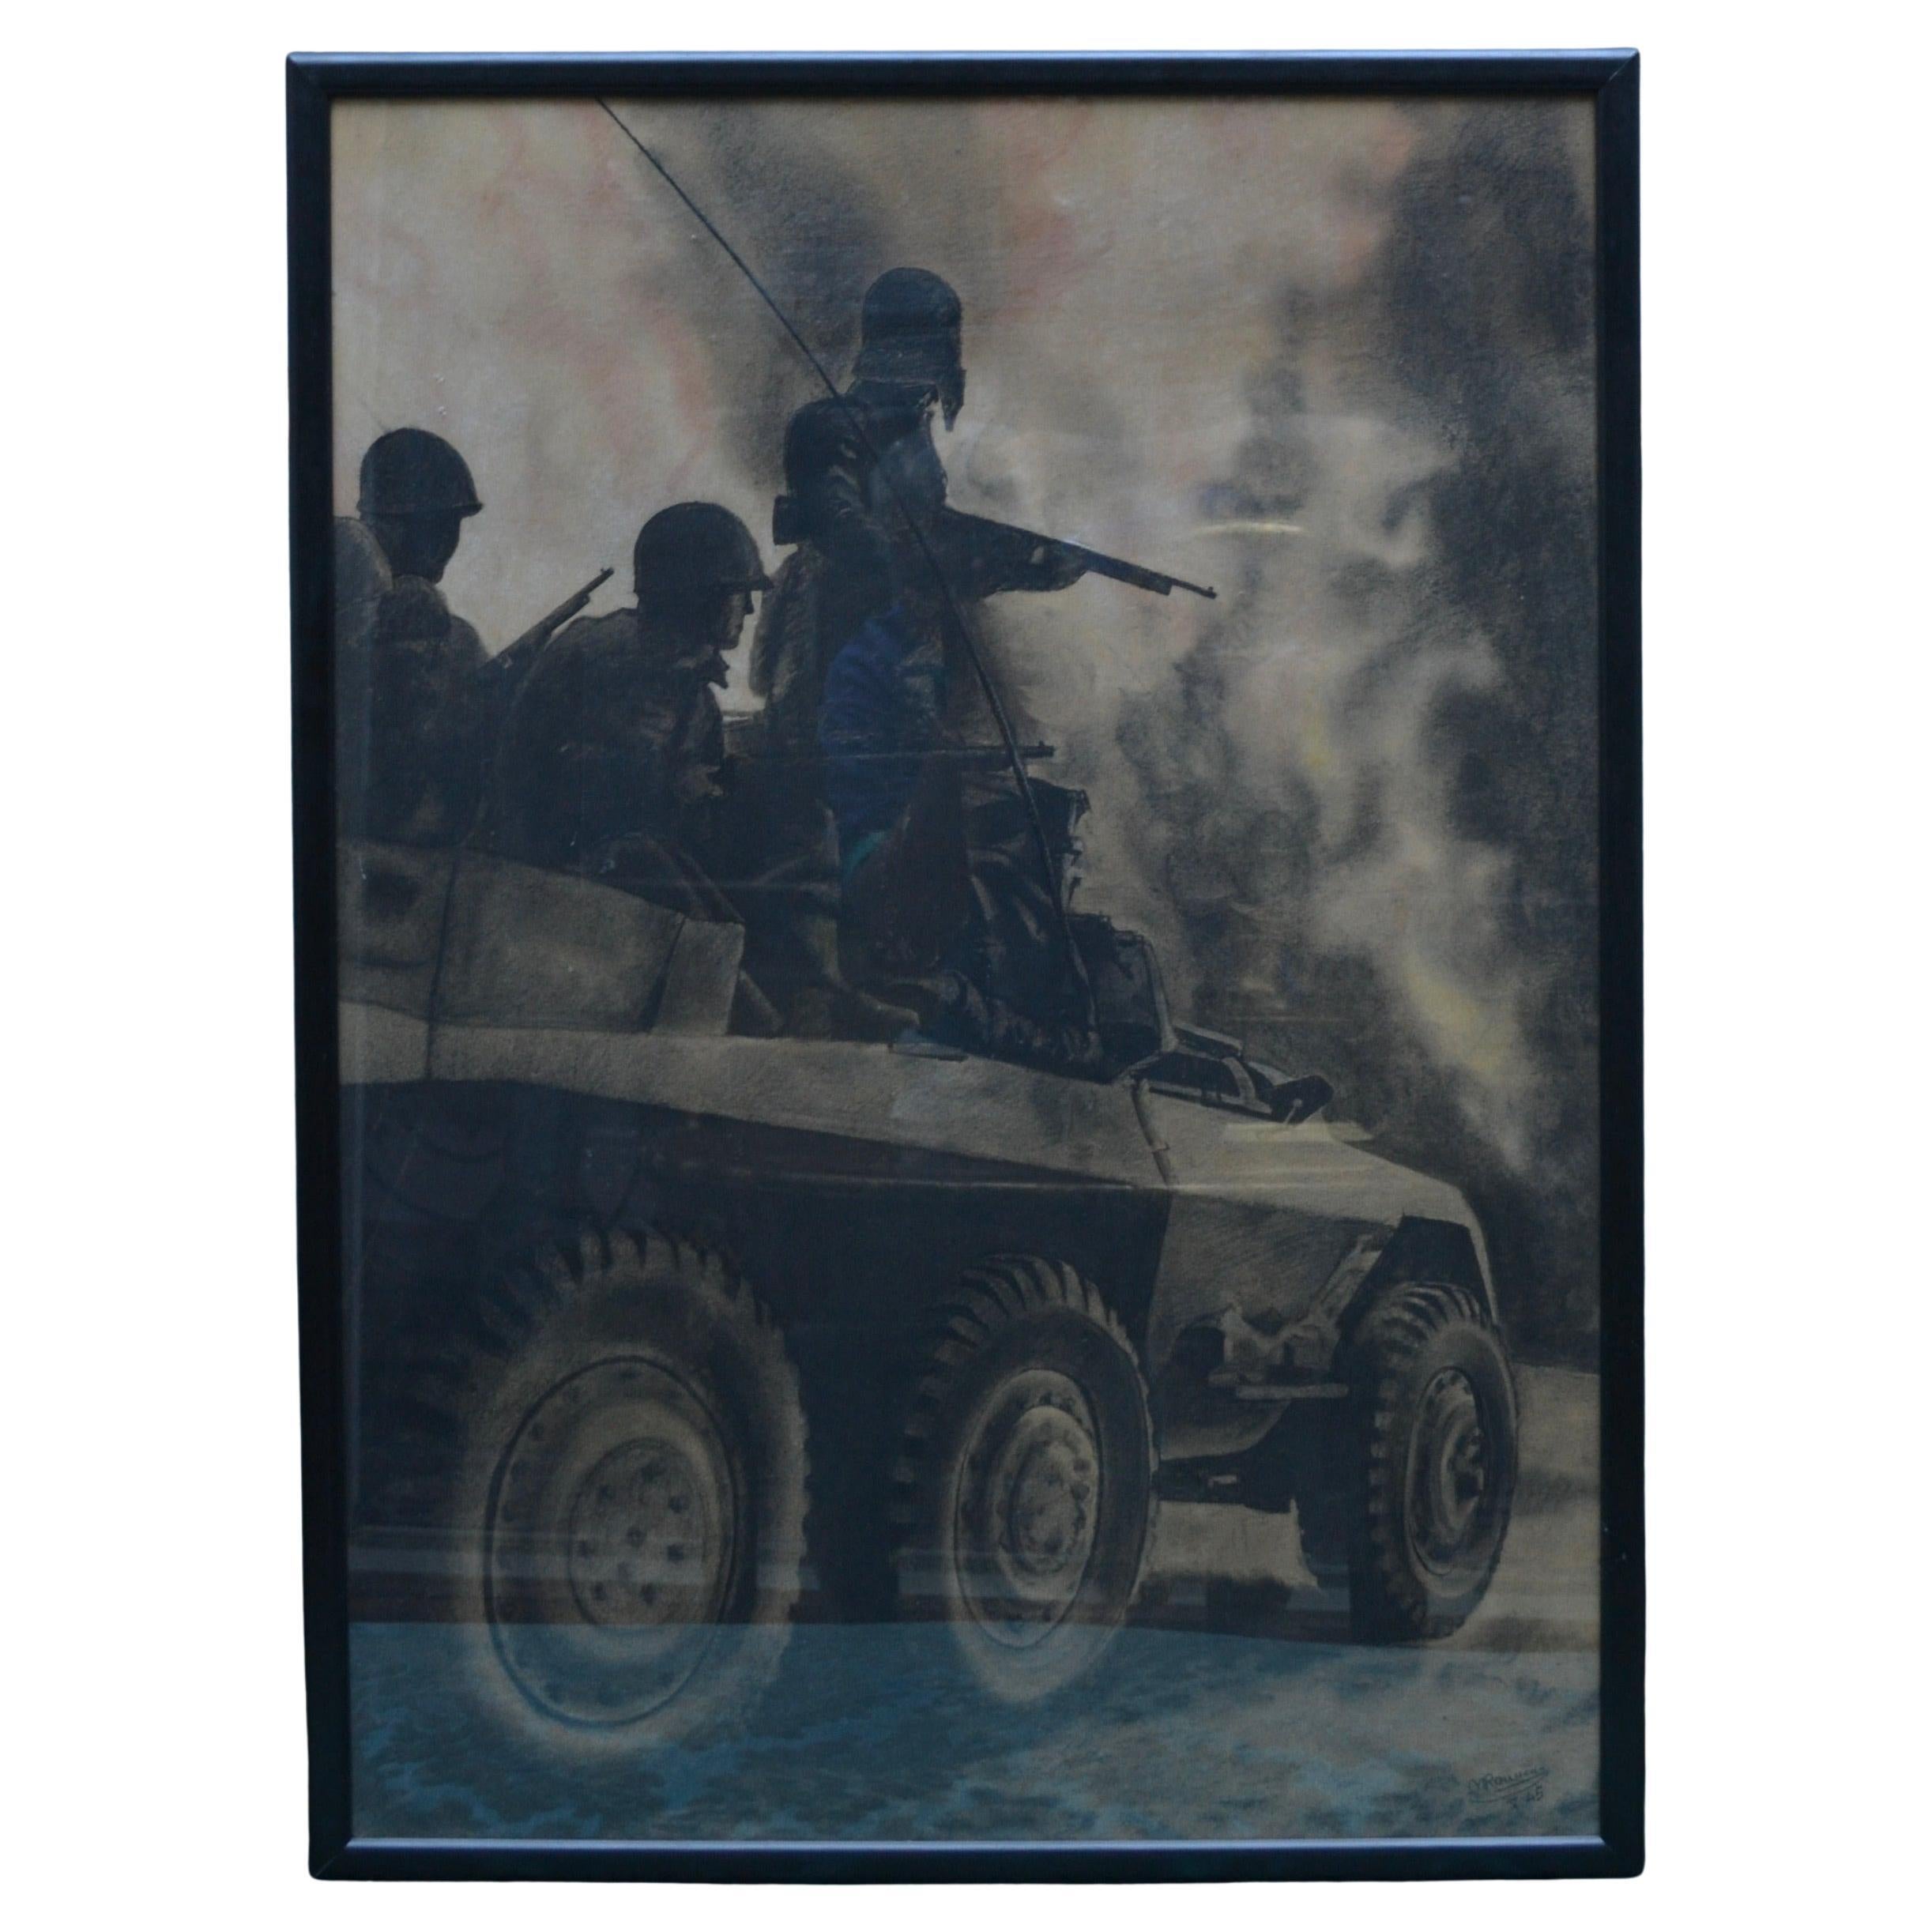 An interesting piece of World War II Militaria consisting of a chalk sketch or drawing of  three US Military personnel in combat with guns in hand riding on what appears to be a 1943  Ford M20 Armored Command Vehicle. The last photo in the photo